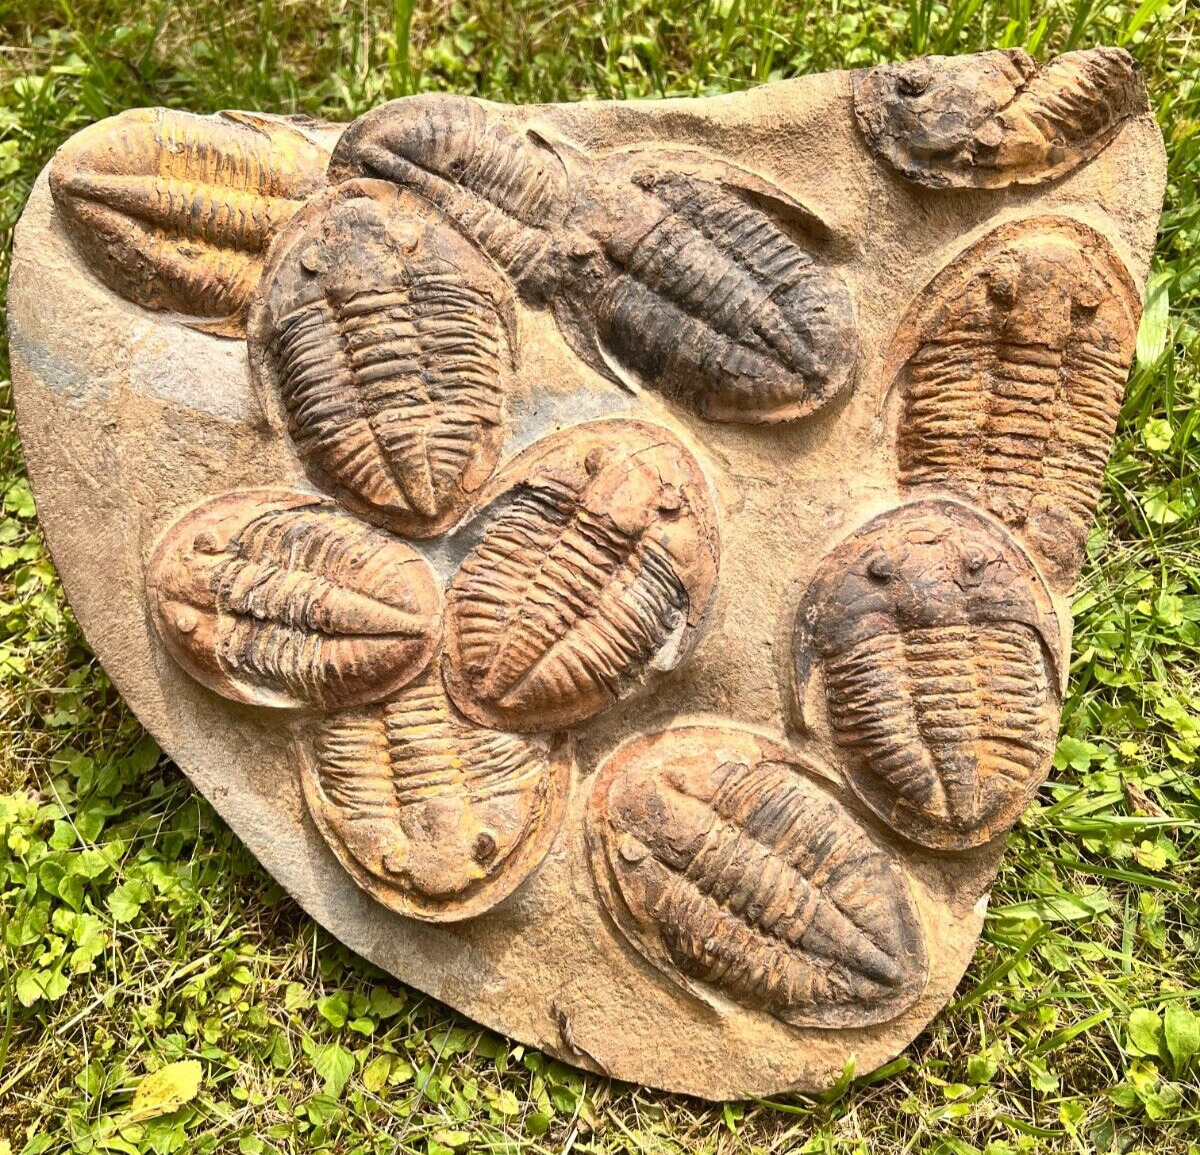 Mortality Plate Of Large Asaphid Trilobites Fossils